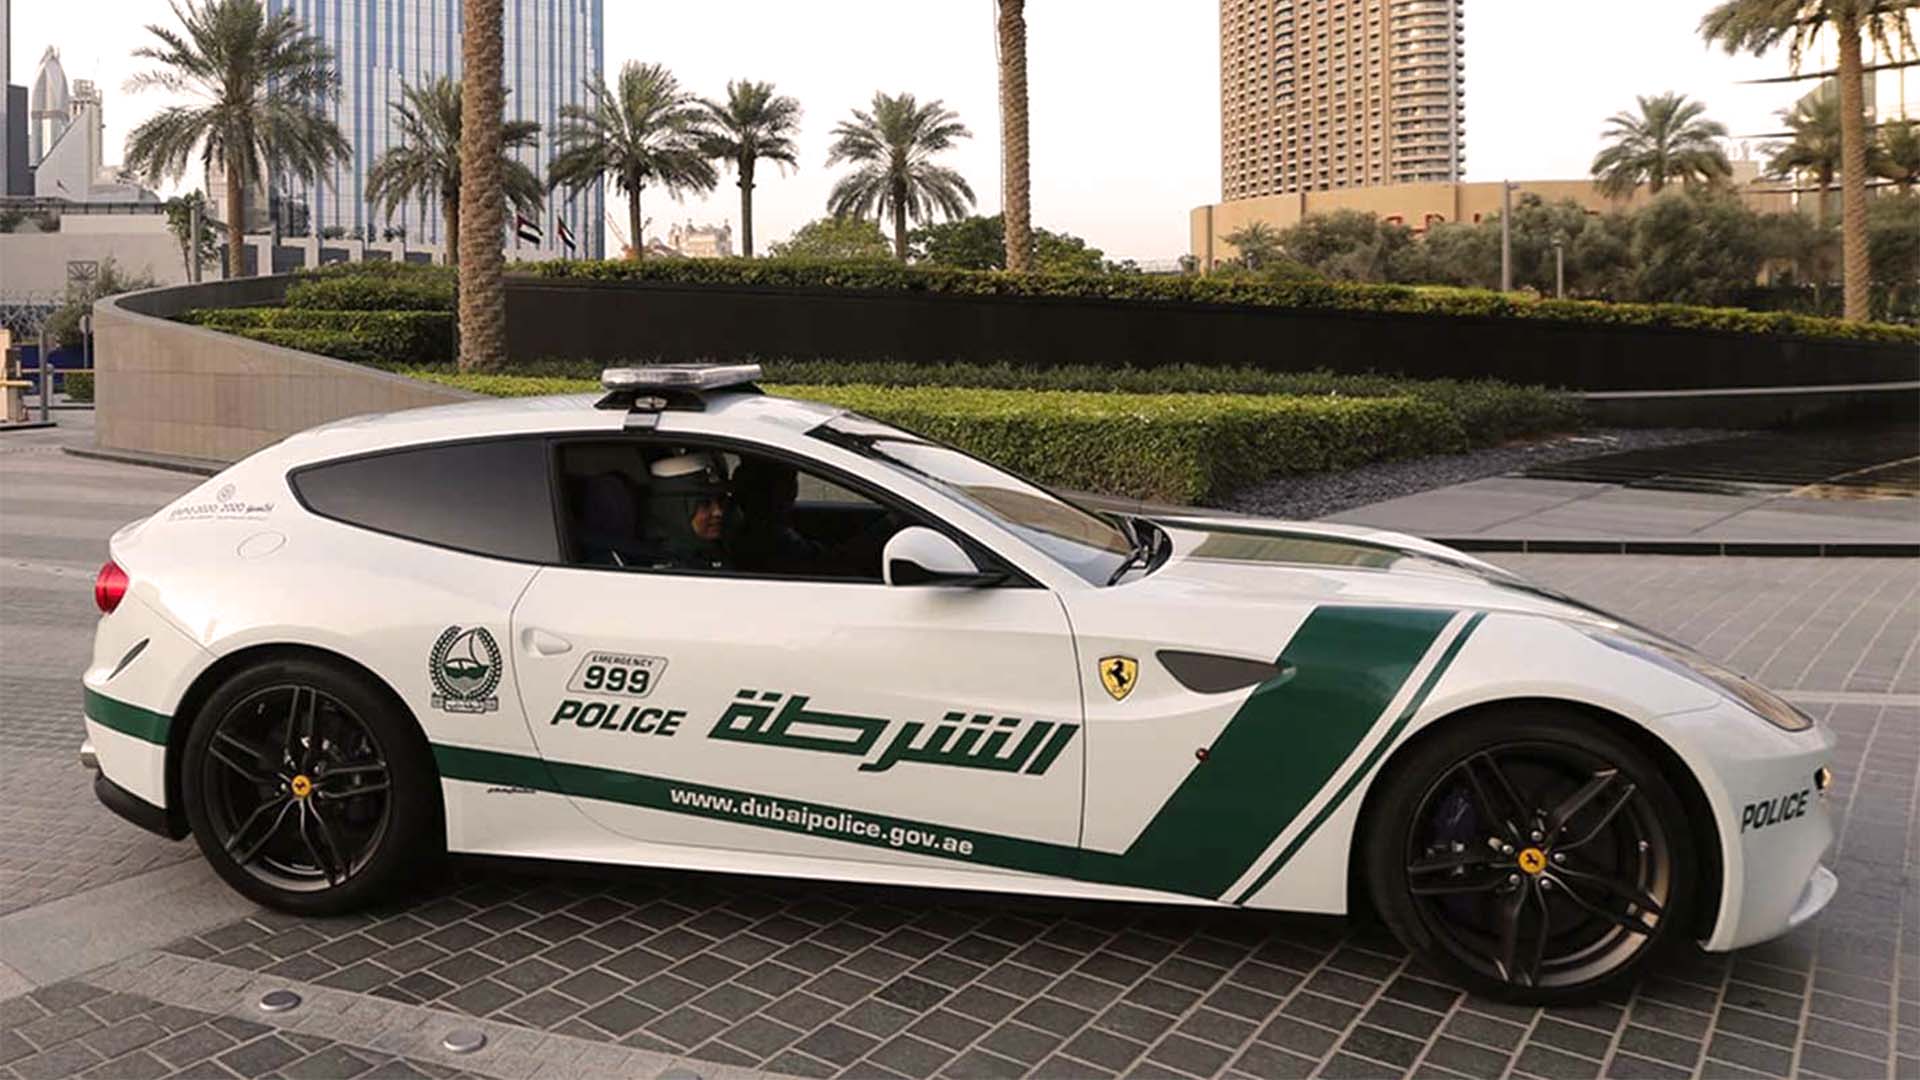 In the absence of one, there are two Ferrari FF patrolling the city of Dubai